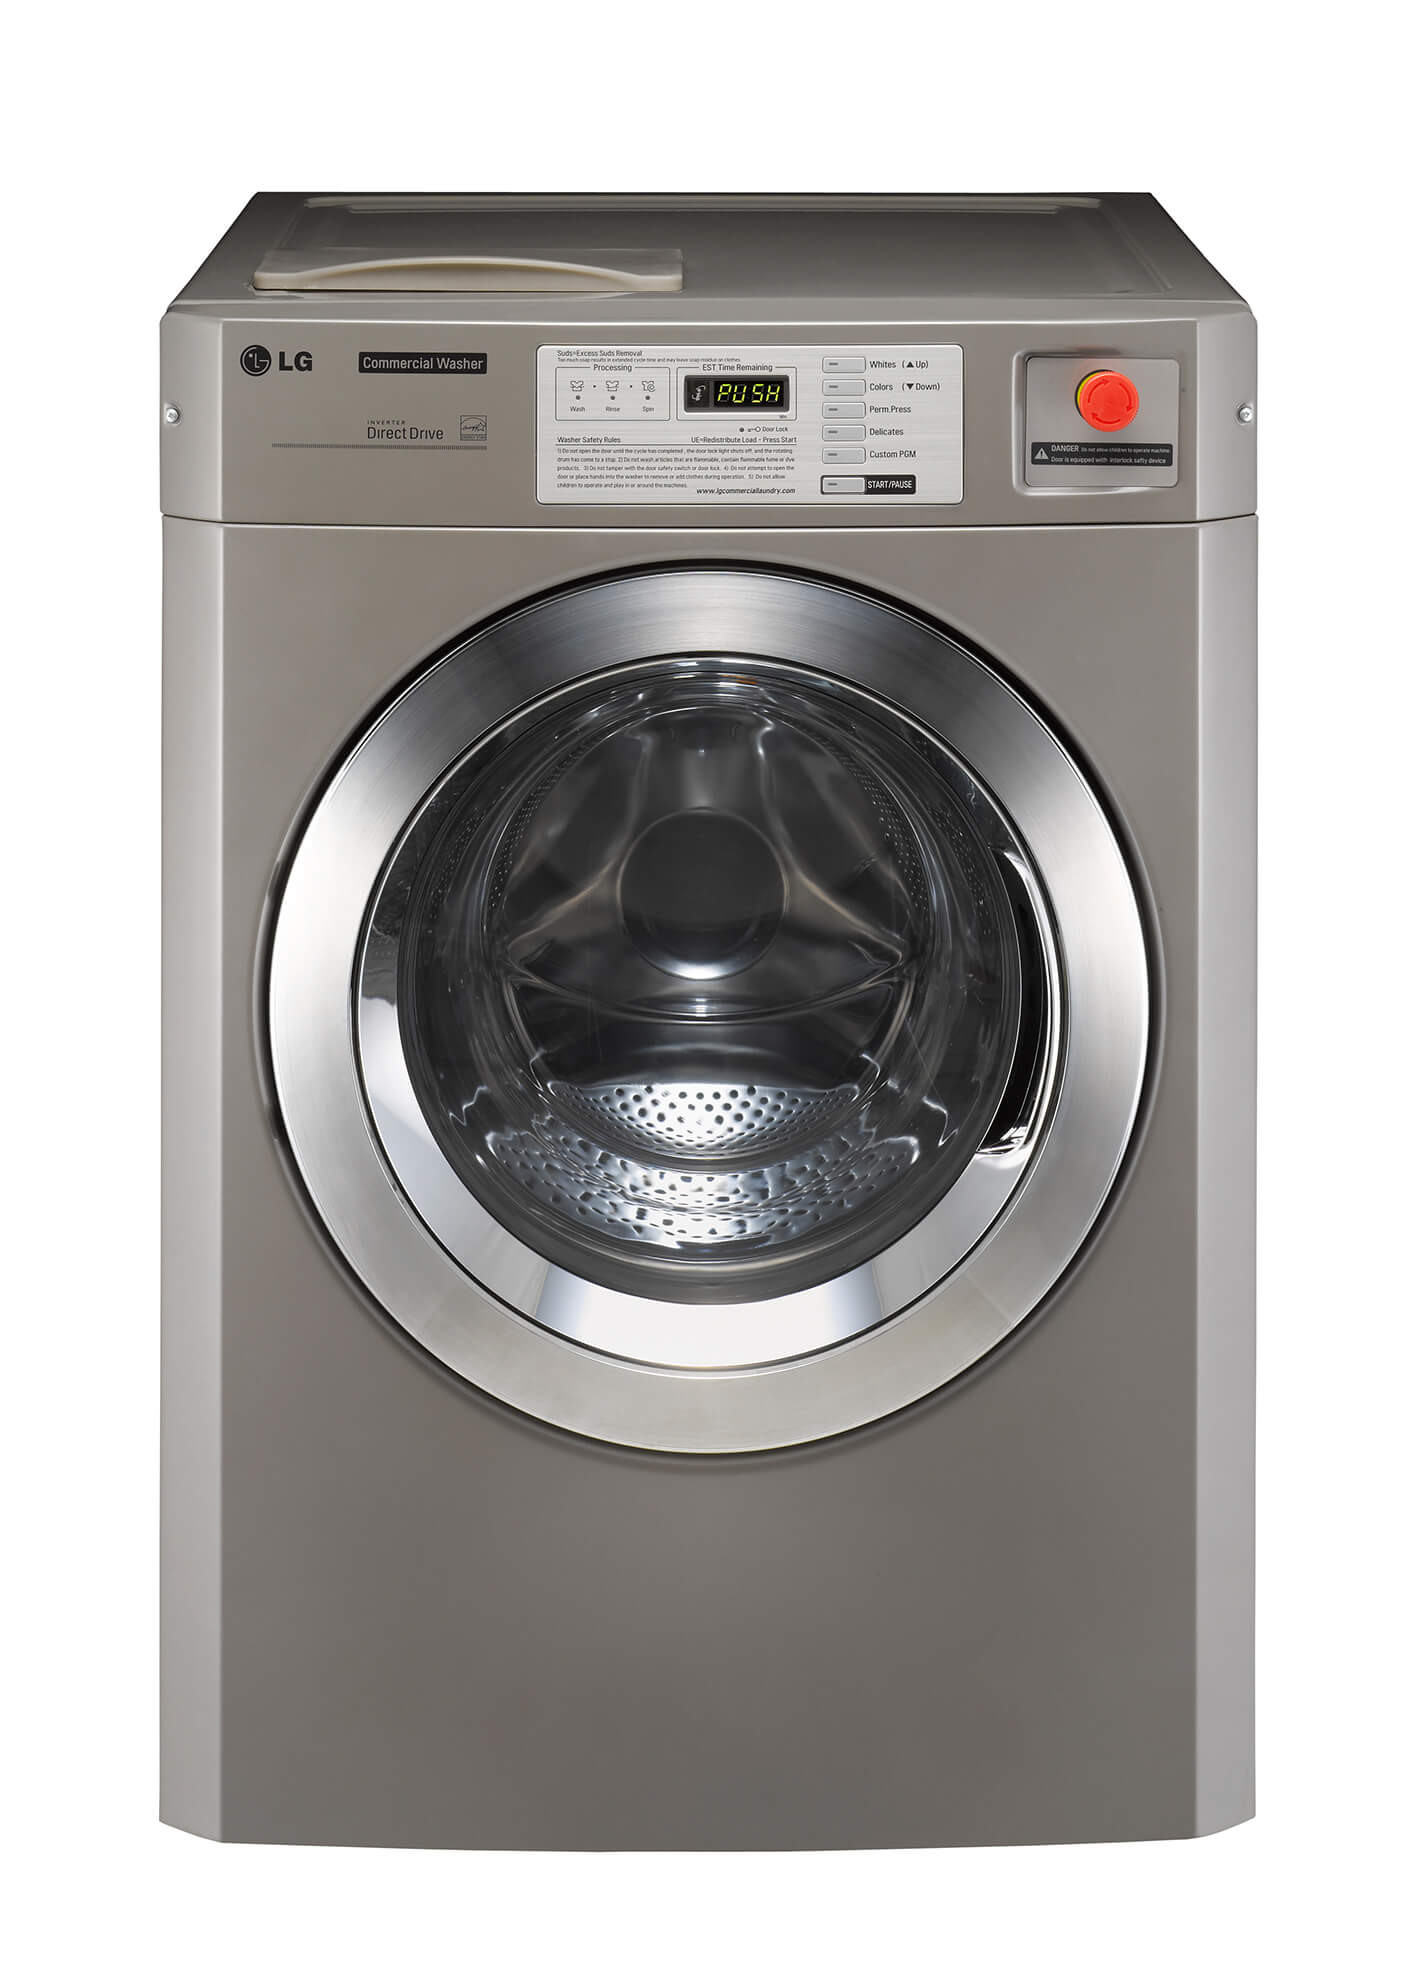 LG FH0C7FD3S Commercial Washing Machine, Front Load, 15KG - Silver